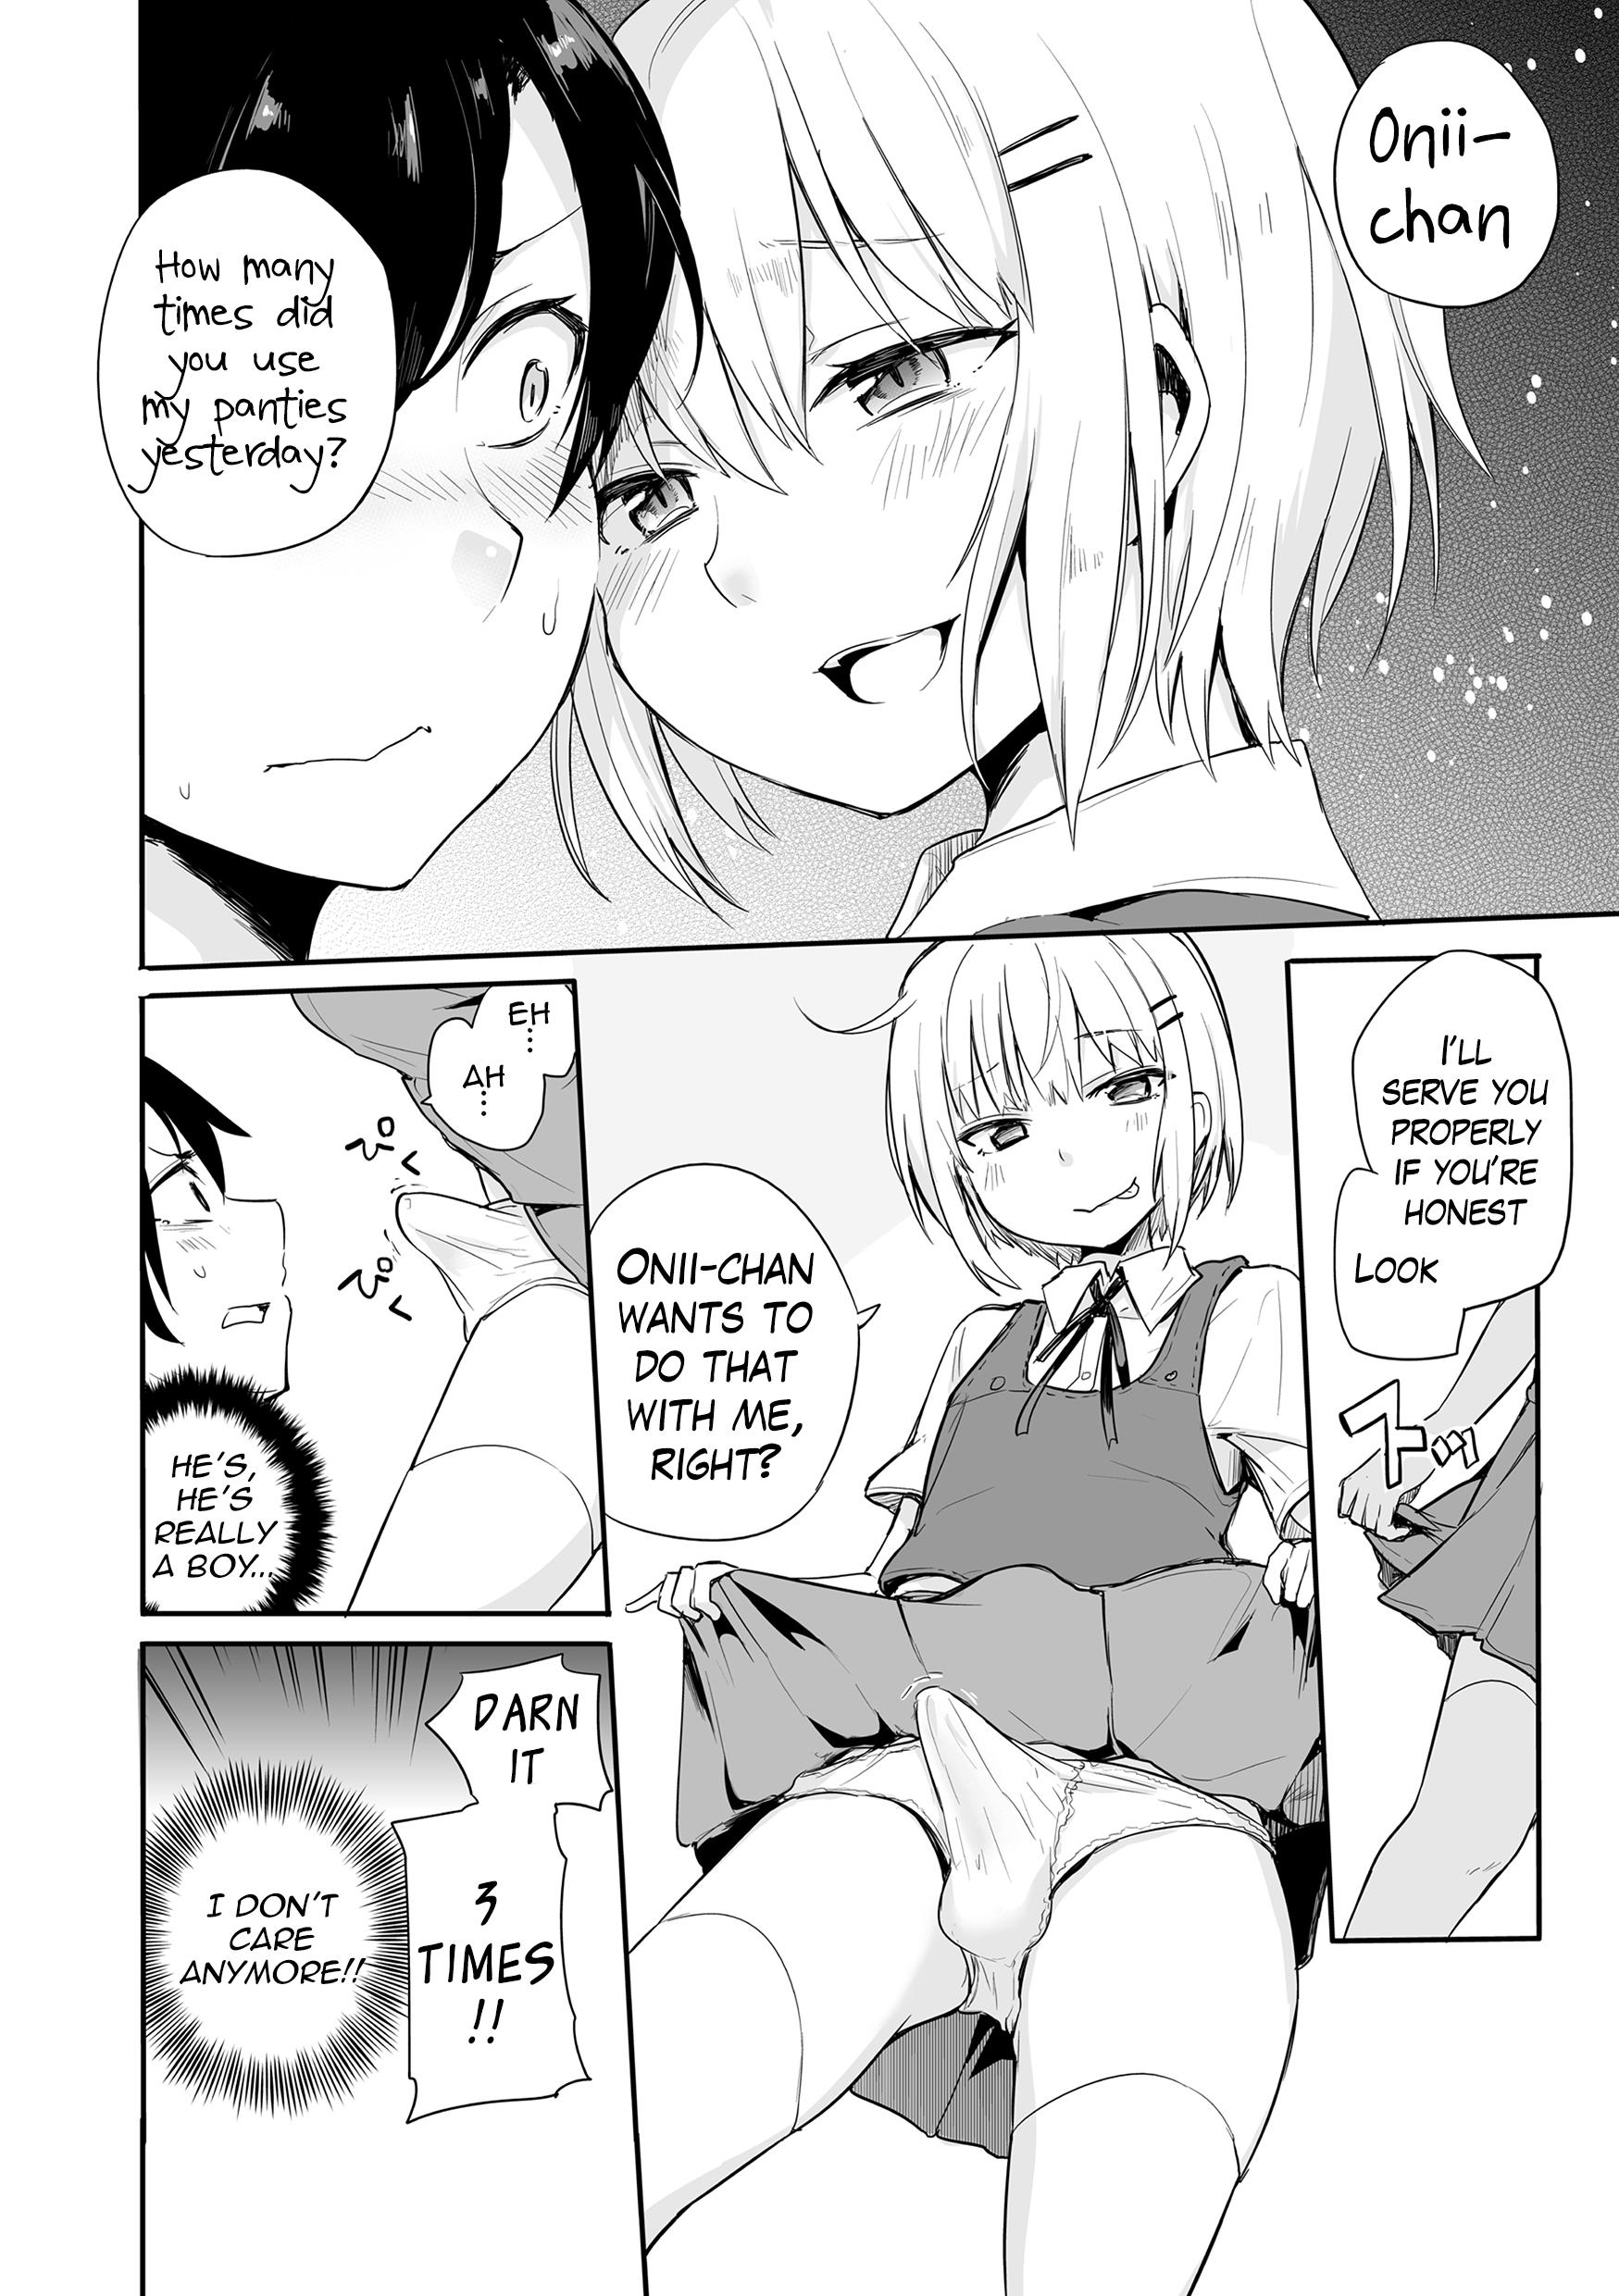 Cream Kono Joukyou de Otouto Route ga nai no wa Okashii! | This Situation is too Weird for it not to be a Little Brother’s Route! Gay Physicals - Page 7